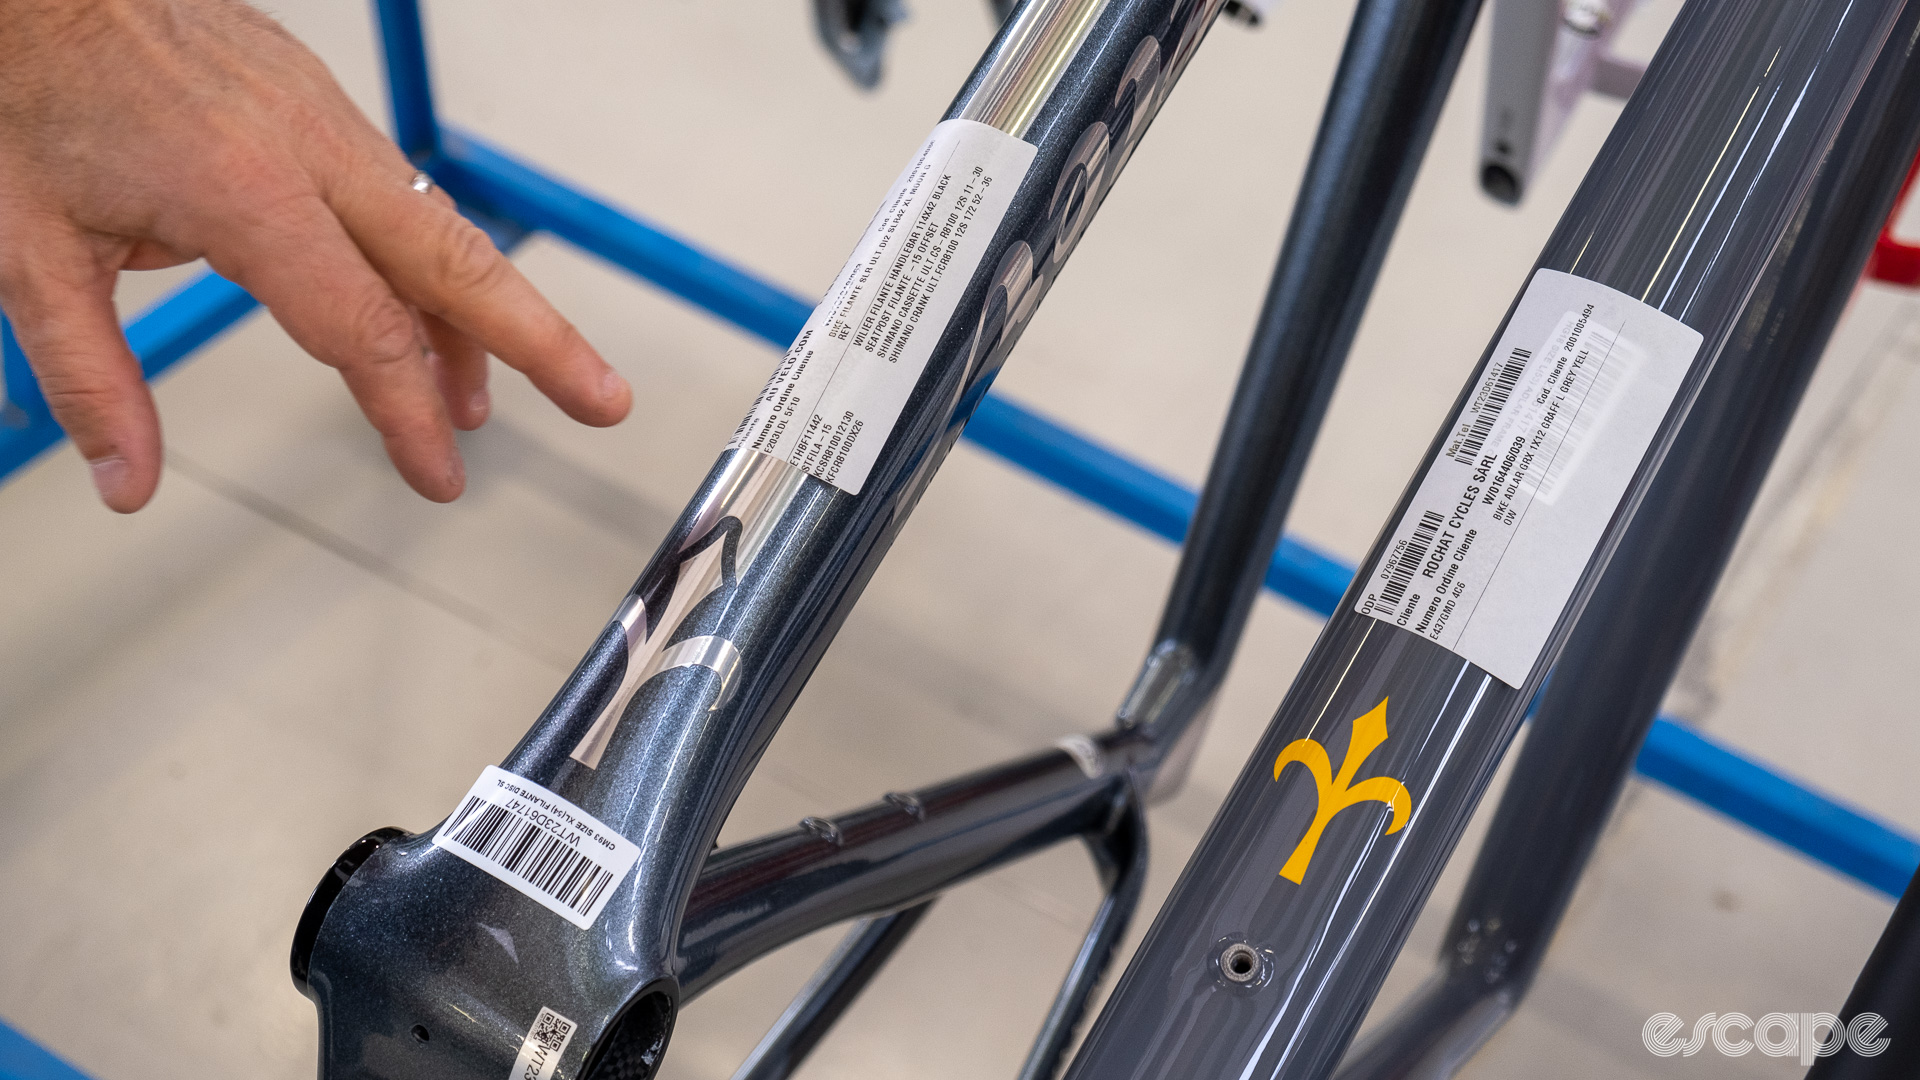 The photo shows a sticker and bar code on the down tube of a frame that make up part of Wilier's tagging system for bike builds on its assembly line 